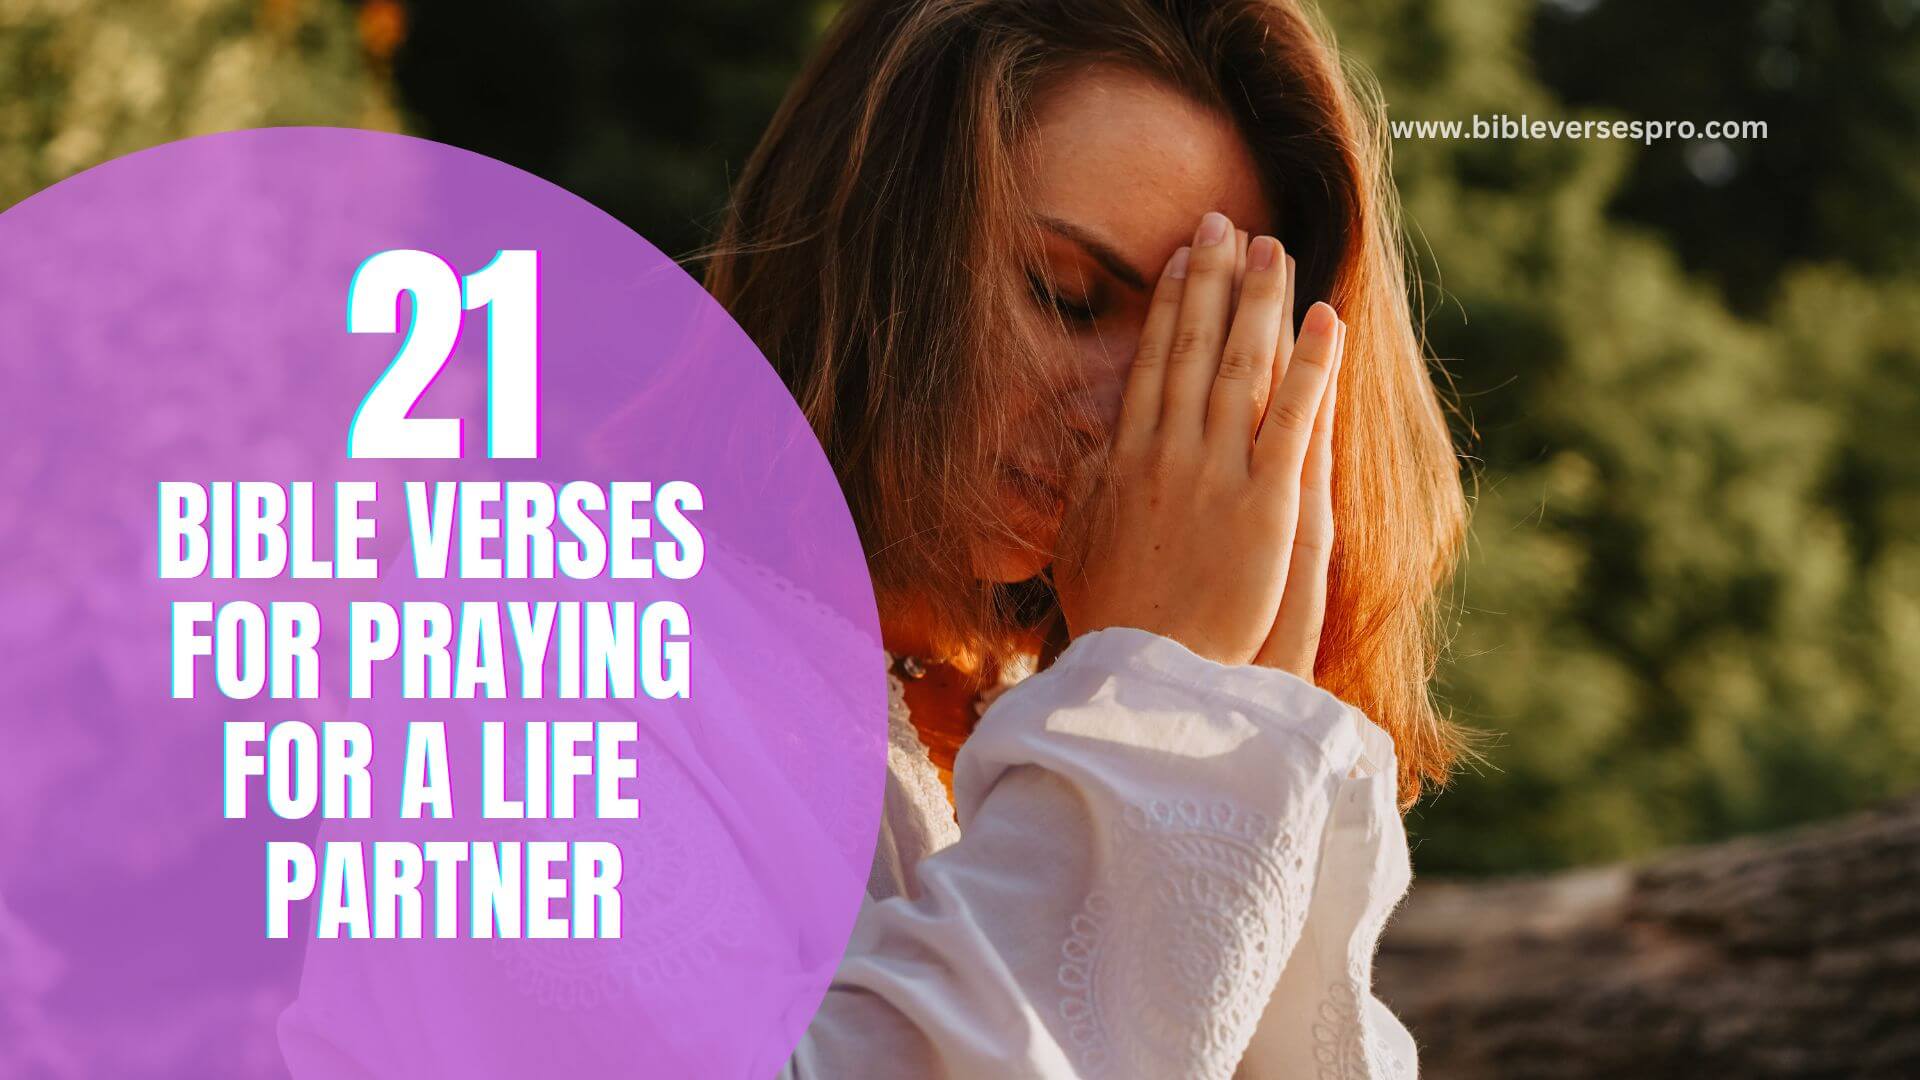 Bible Verses For Praying For A Life Partner